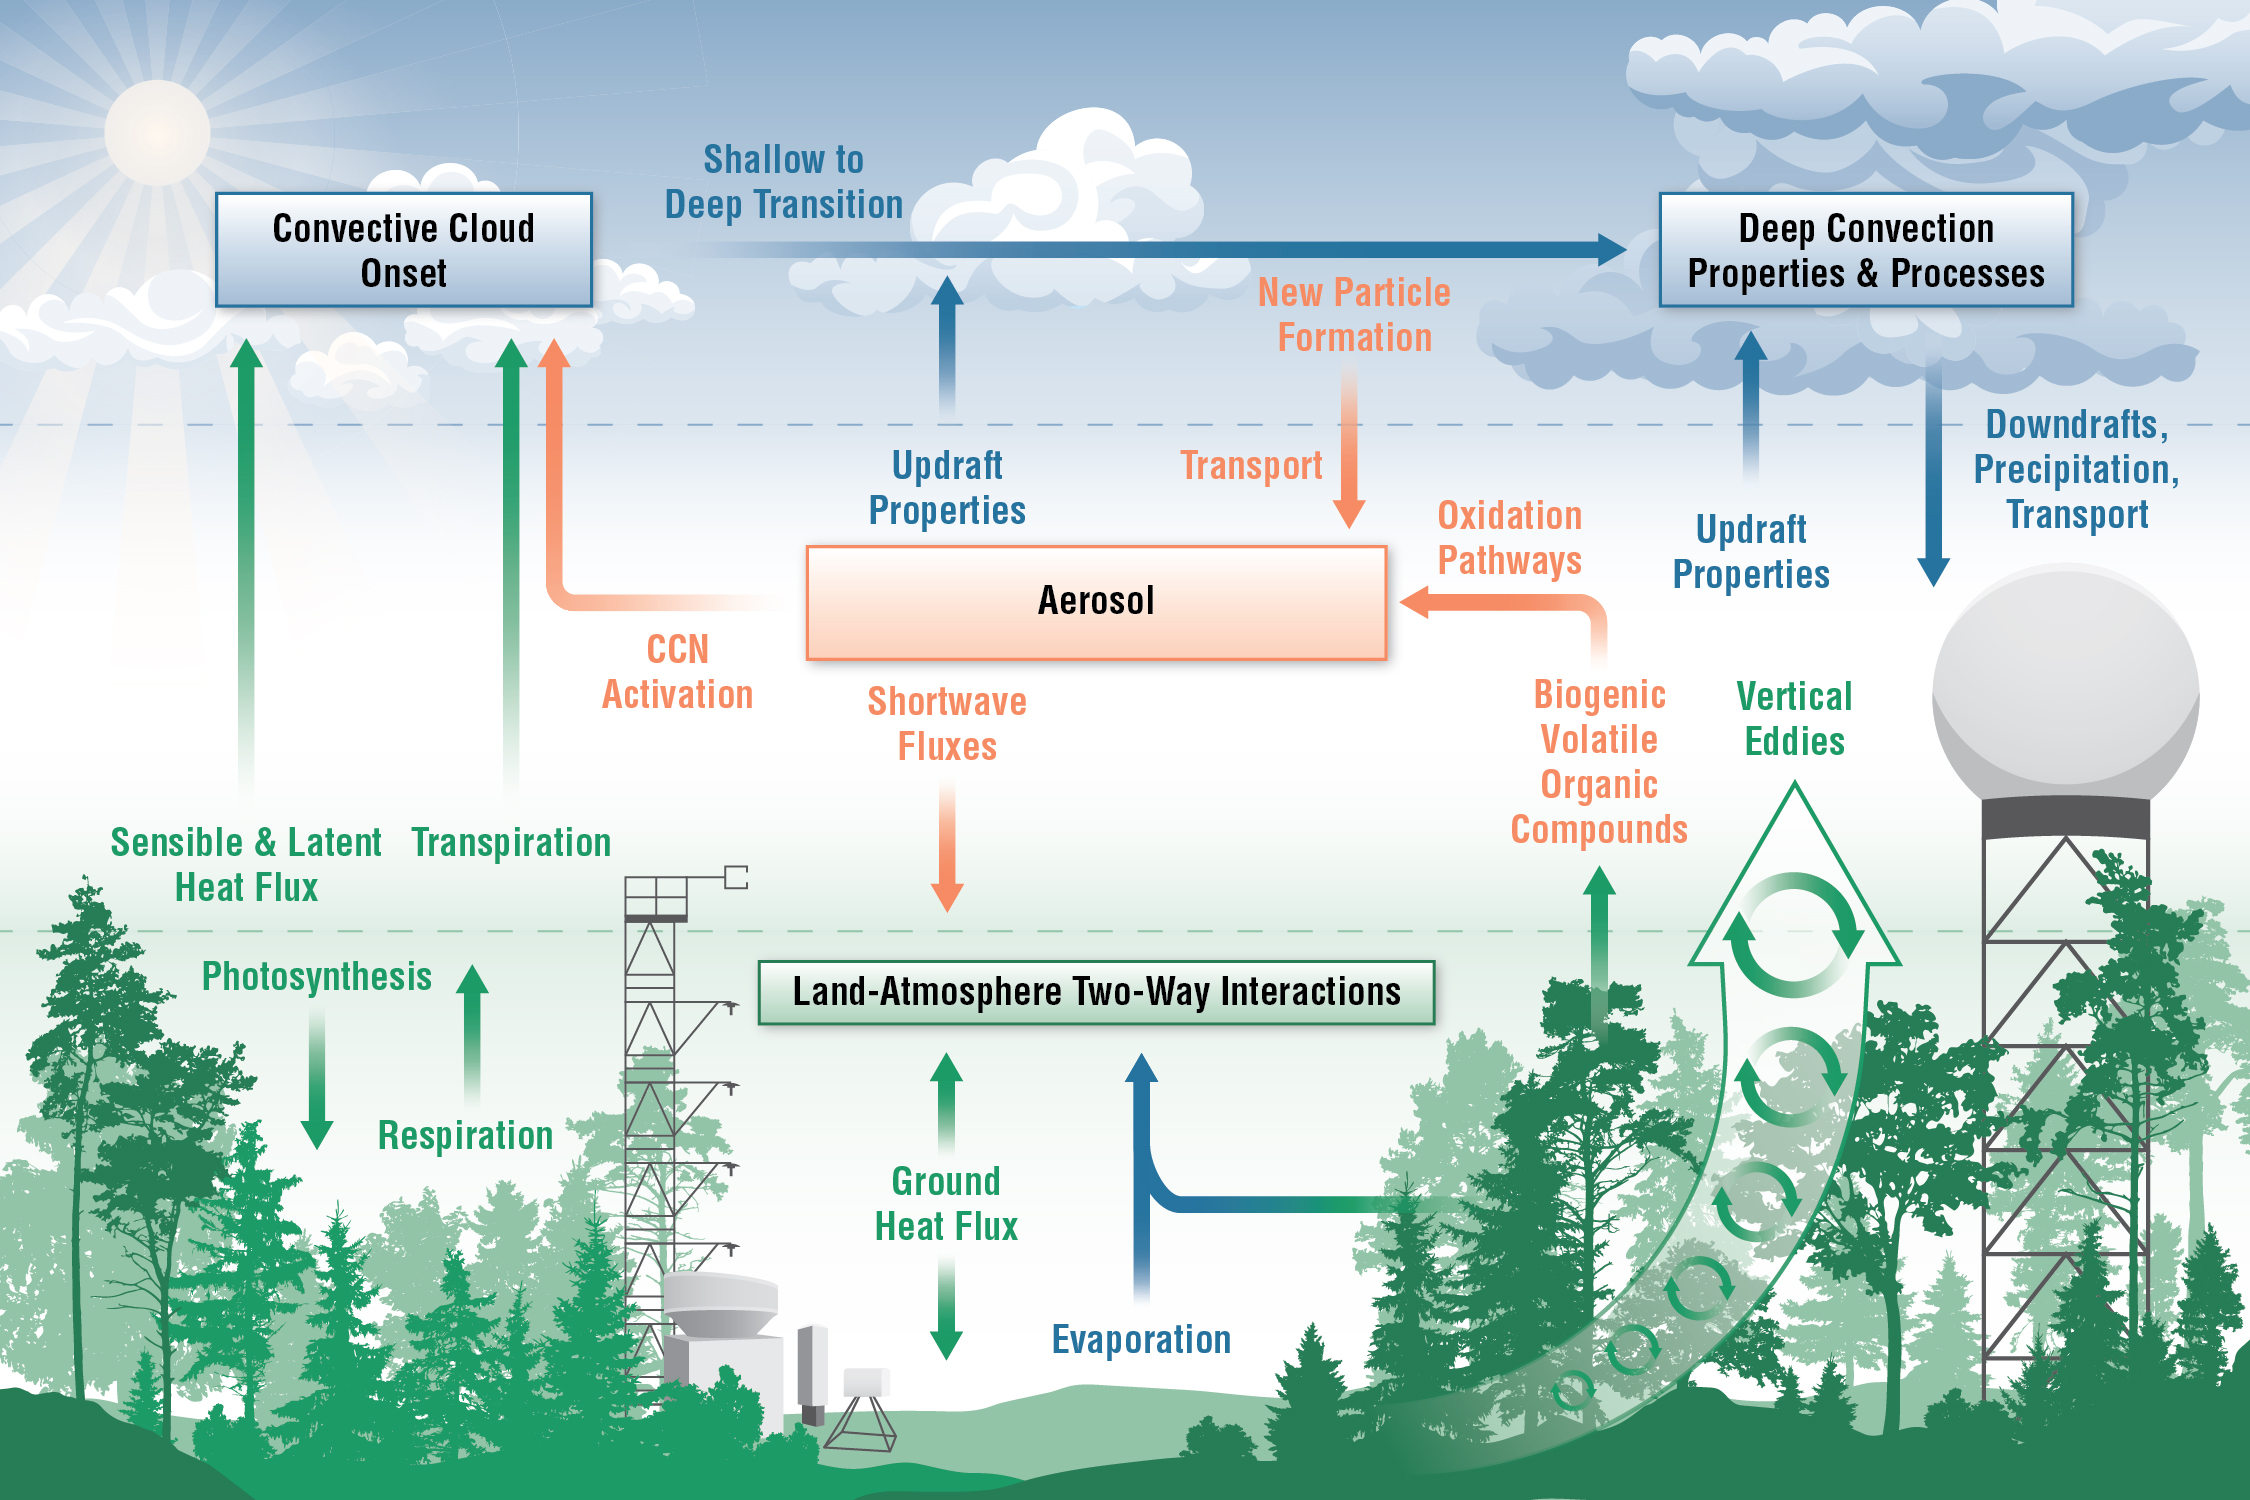 The AMF-3 observatory in Alabama, once up and running in 2023, will capture many properties and processes linked to land-atmosphere interactions, aerosols, and convective storms. Graphic is courtesy of Brookhaven National Laboratory.